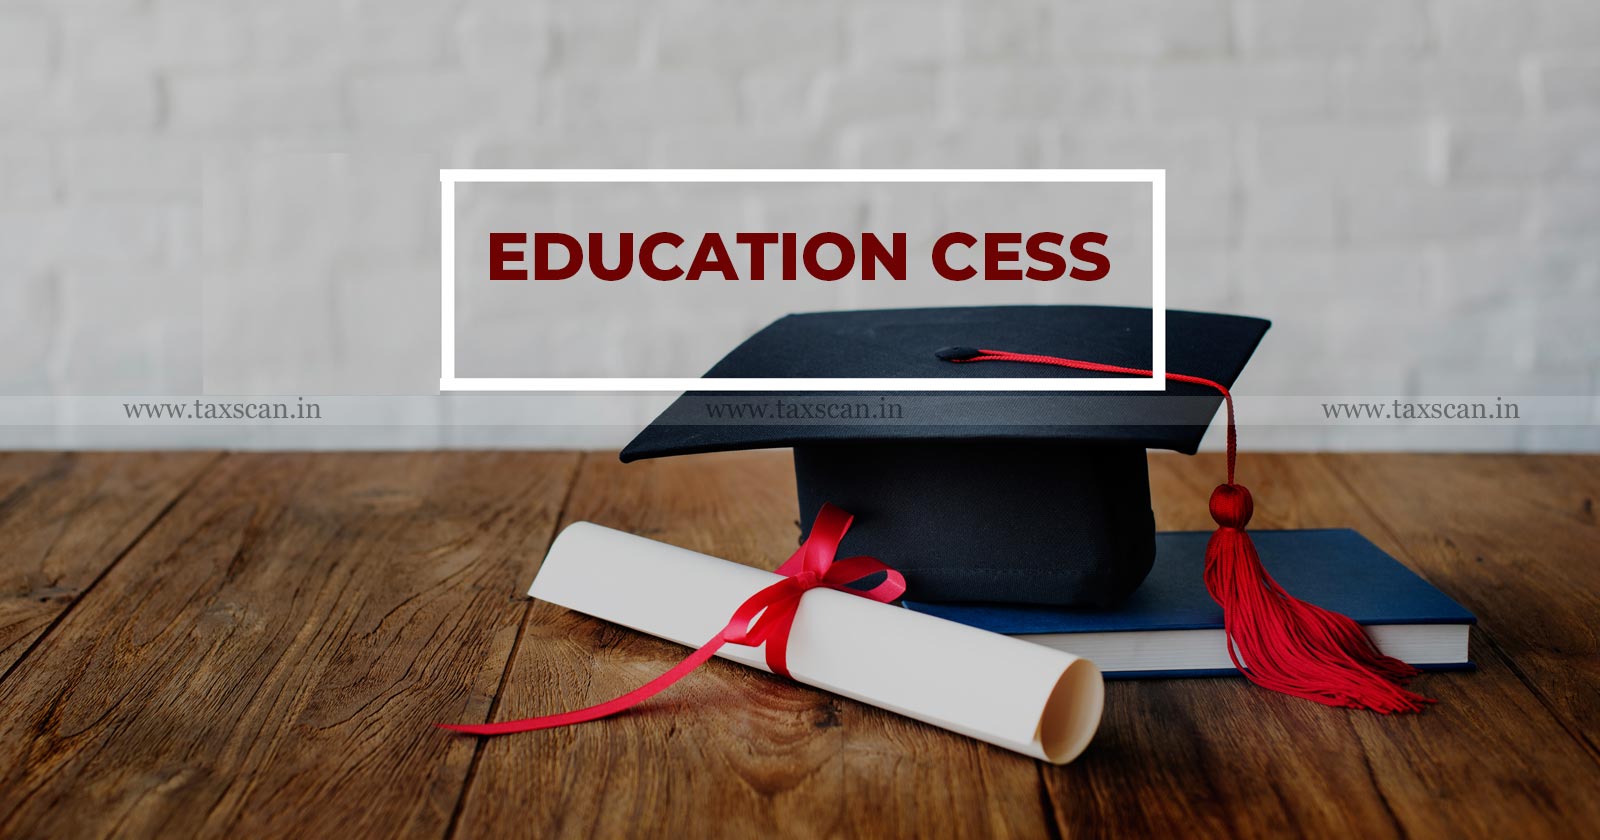 Secondary and Higher Secondary Education Cess - Education Cess - Higher Secondary Education Cess - Education Cess are Part of tax - No Deduction Available - ITAT - taxscan